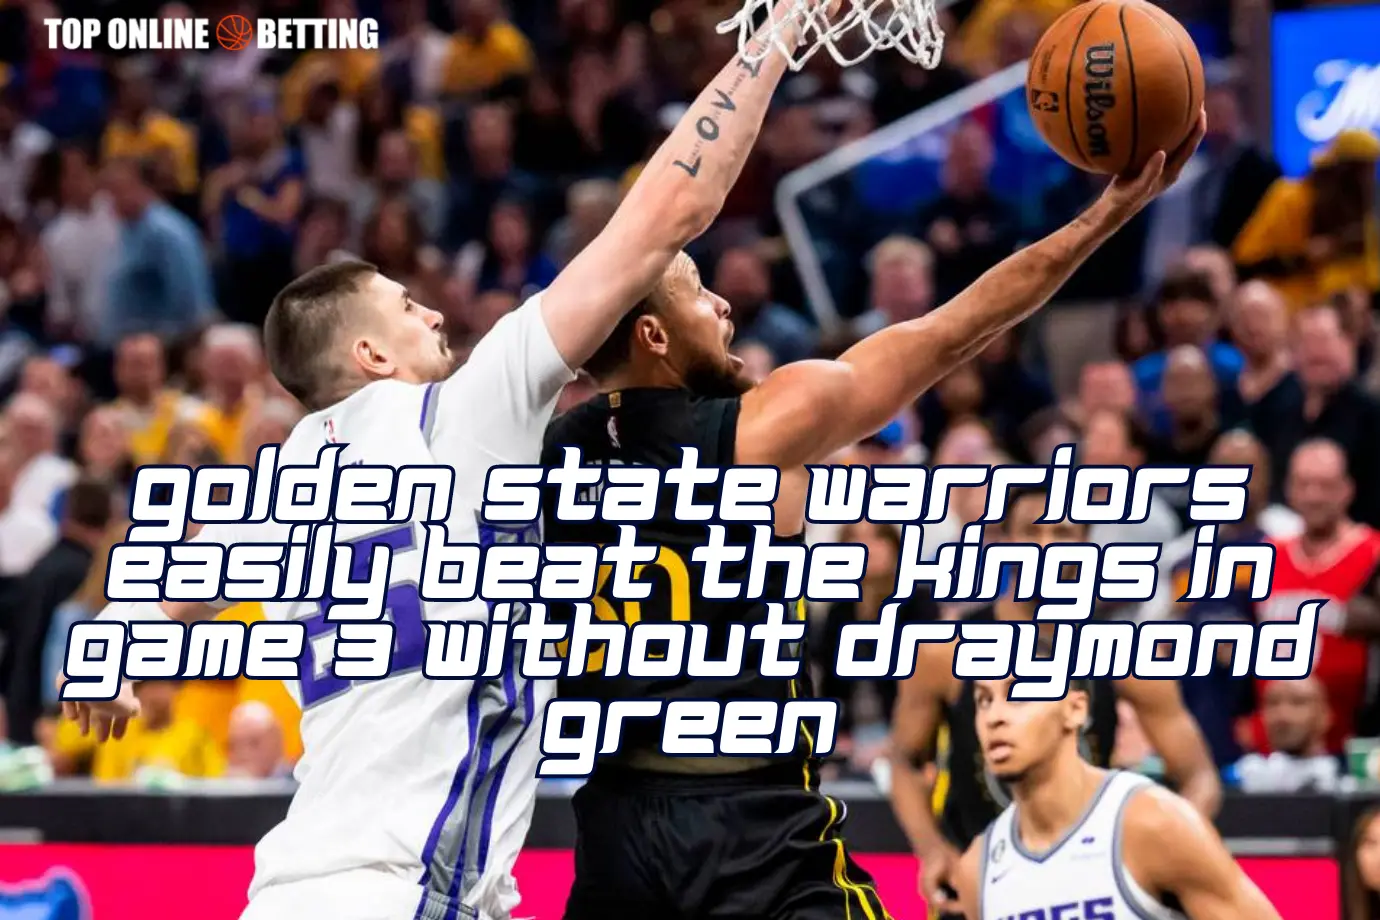 Golden State Warriors easily beat the Kings in Game 3 without Draymond Green